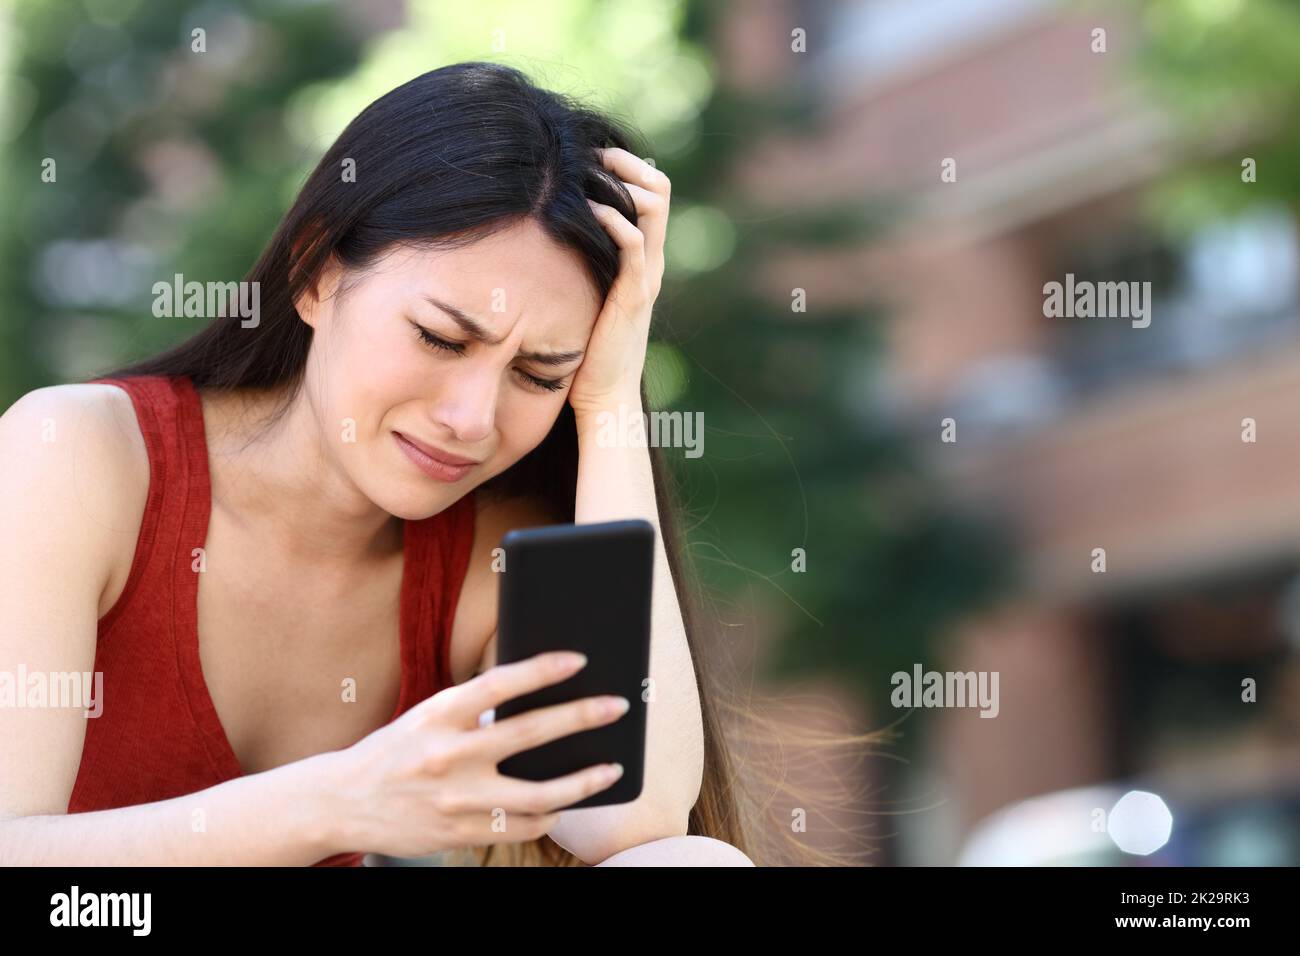 Worried asian woman checking smartphone Stock Photo